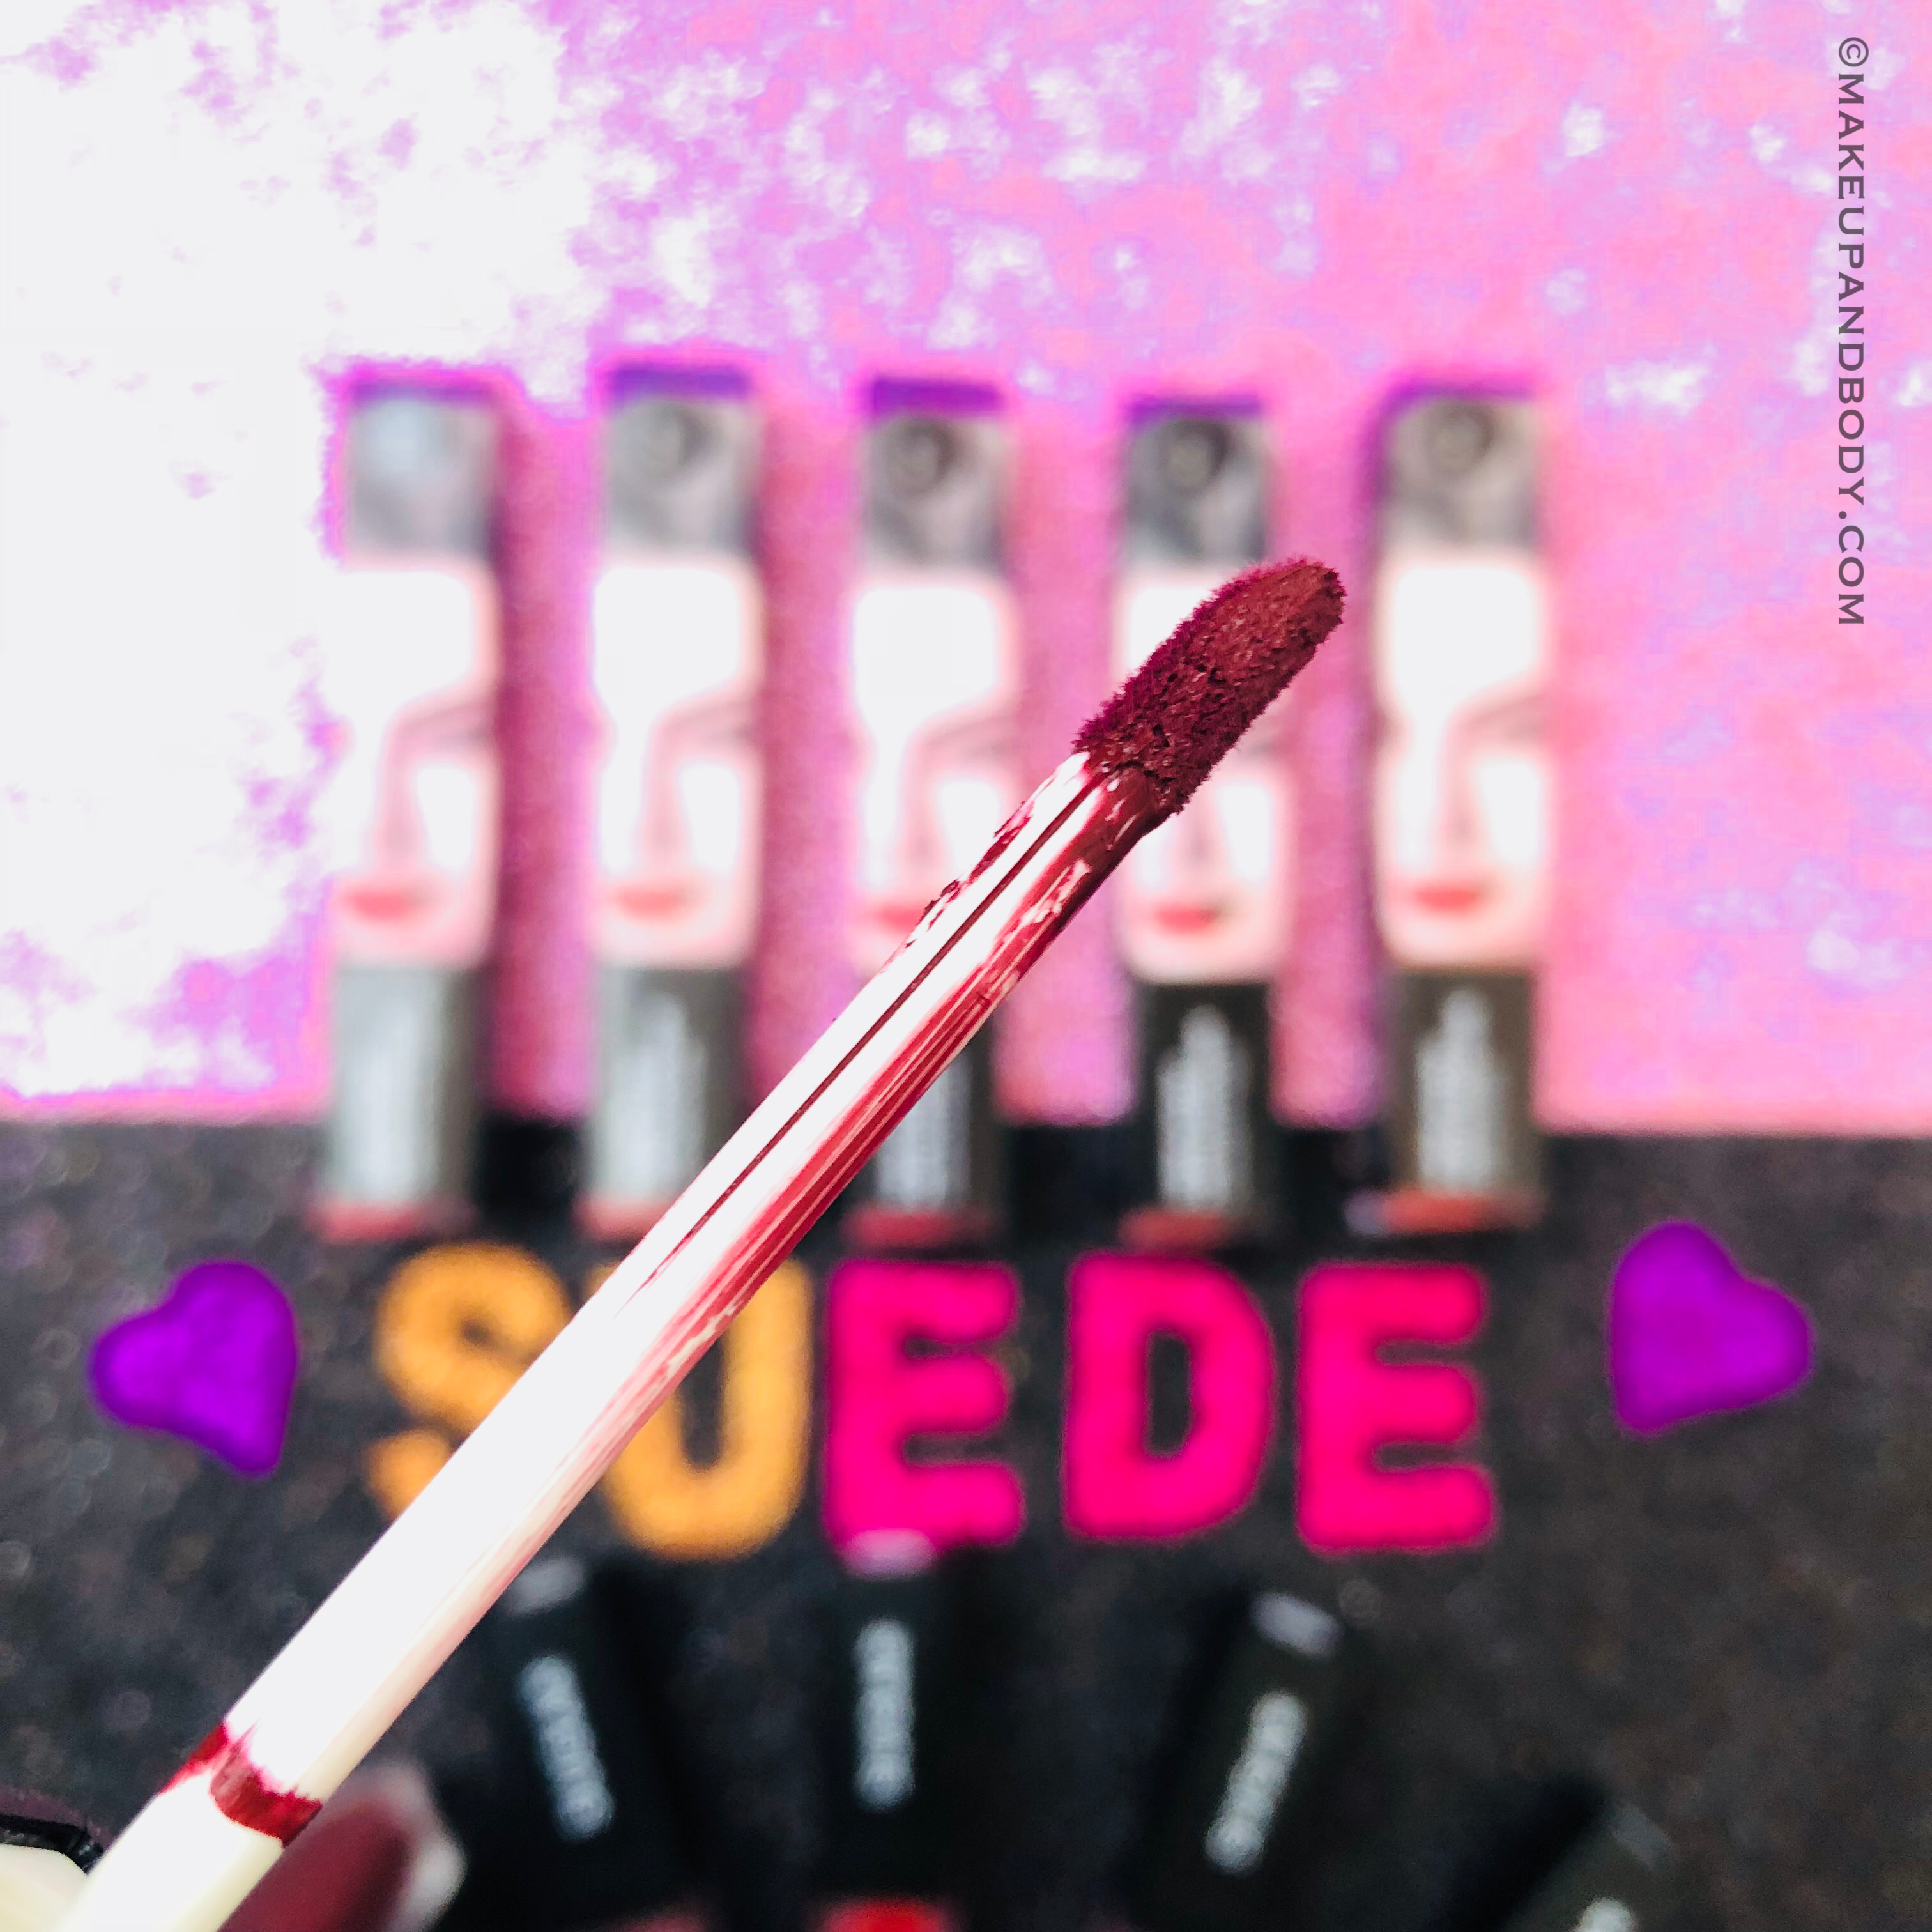 SUGAR Suede Secret Matte Lipcolour -Review And Swatches for all 10 Shades 